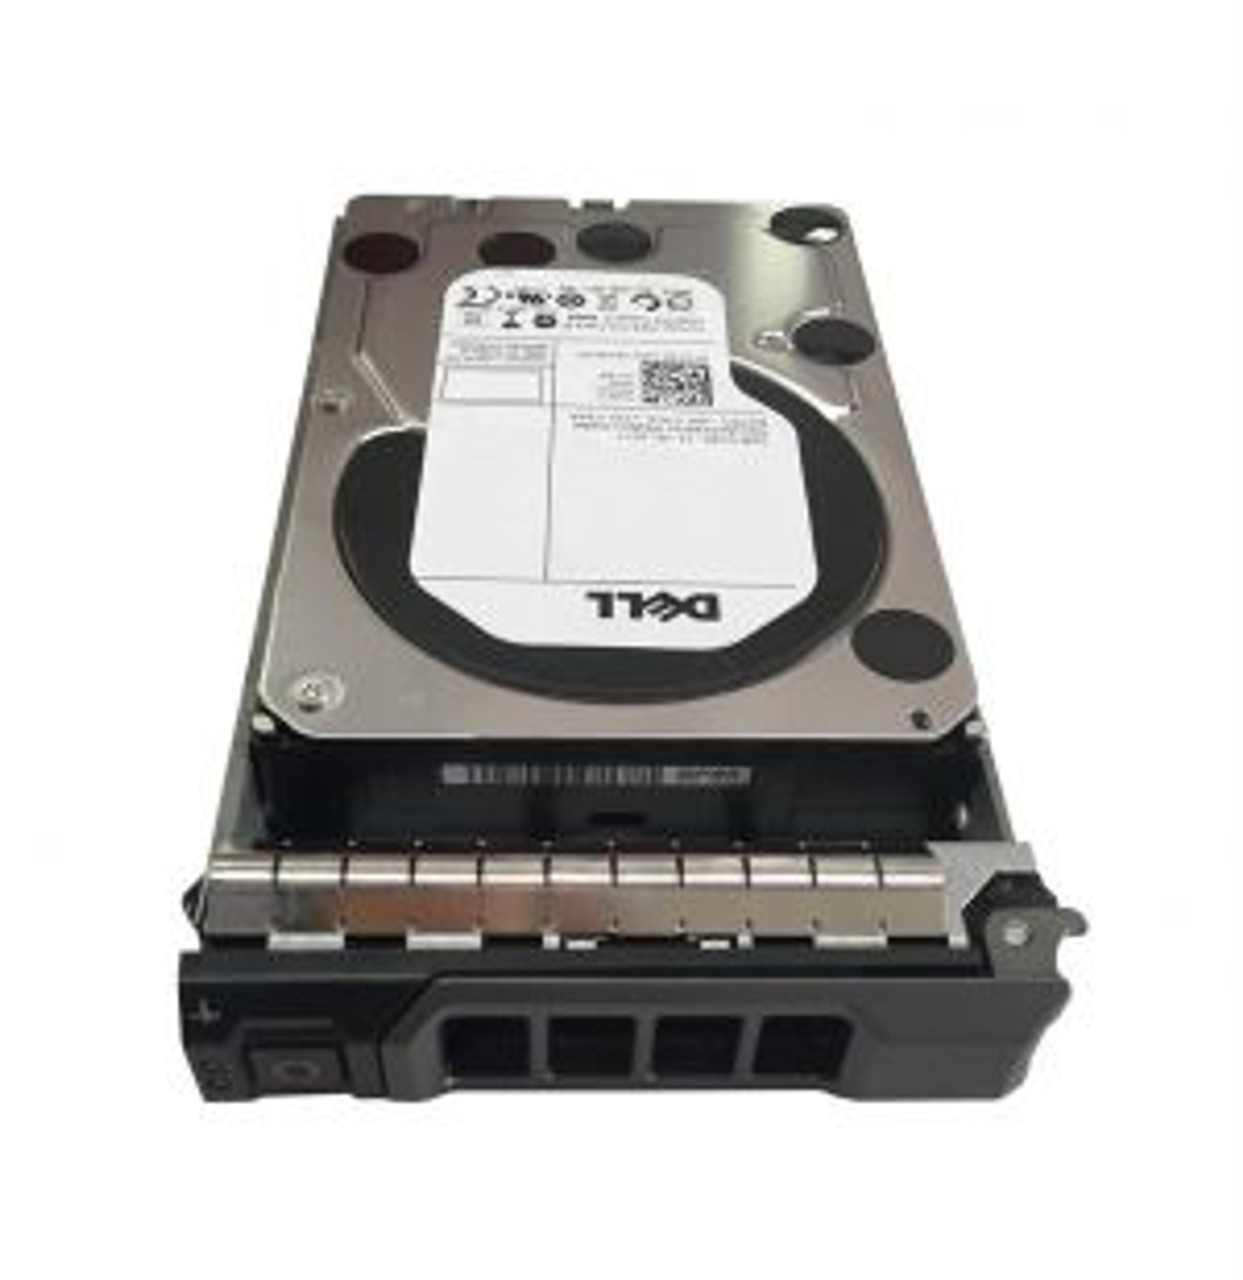 0CDR4H Dell 3TB 7200RPM SAS 6.0 Gbps 3.5 64MB Cache Hot Swap Hard Drive